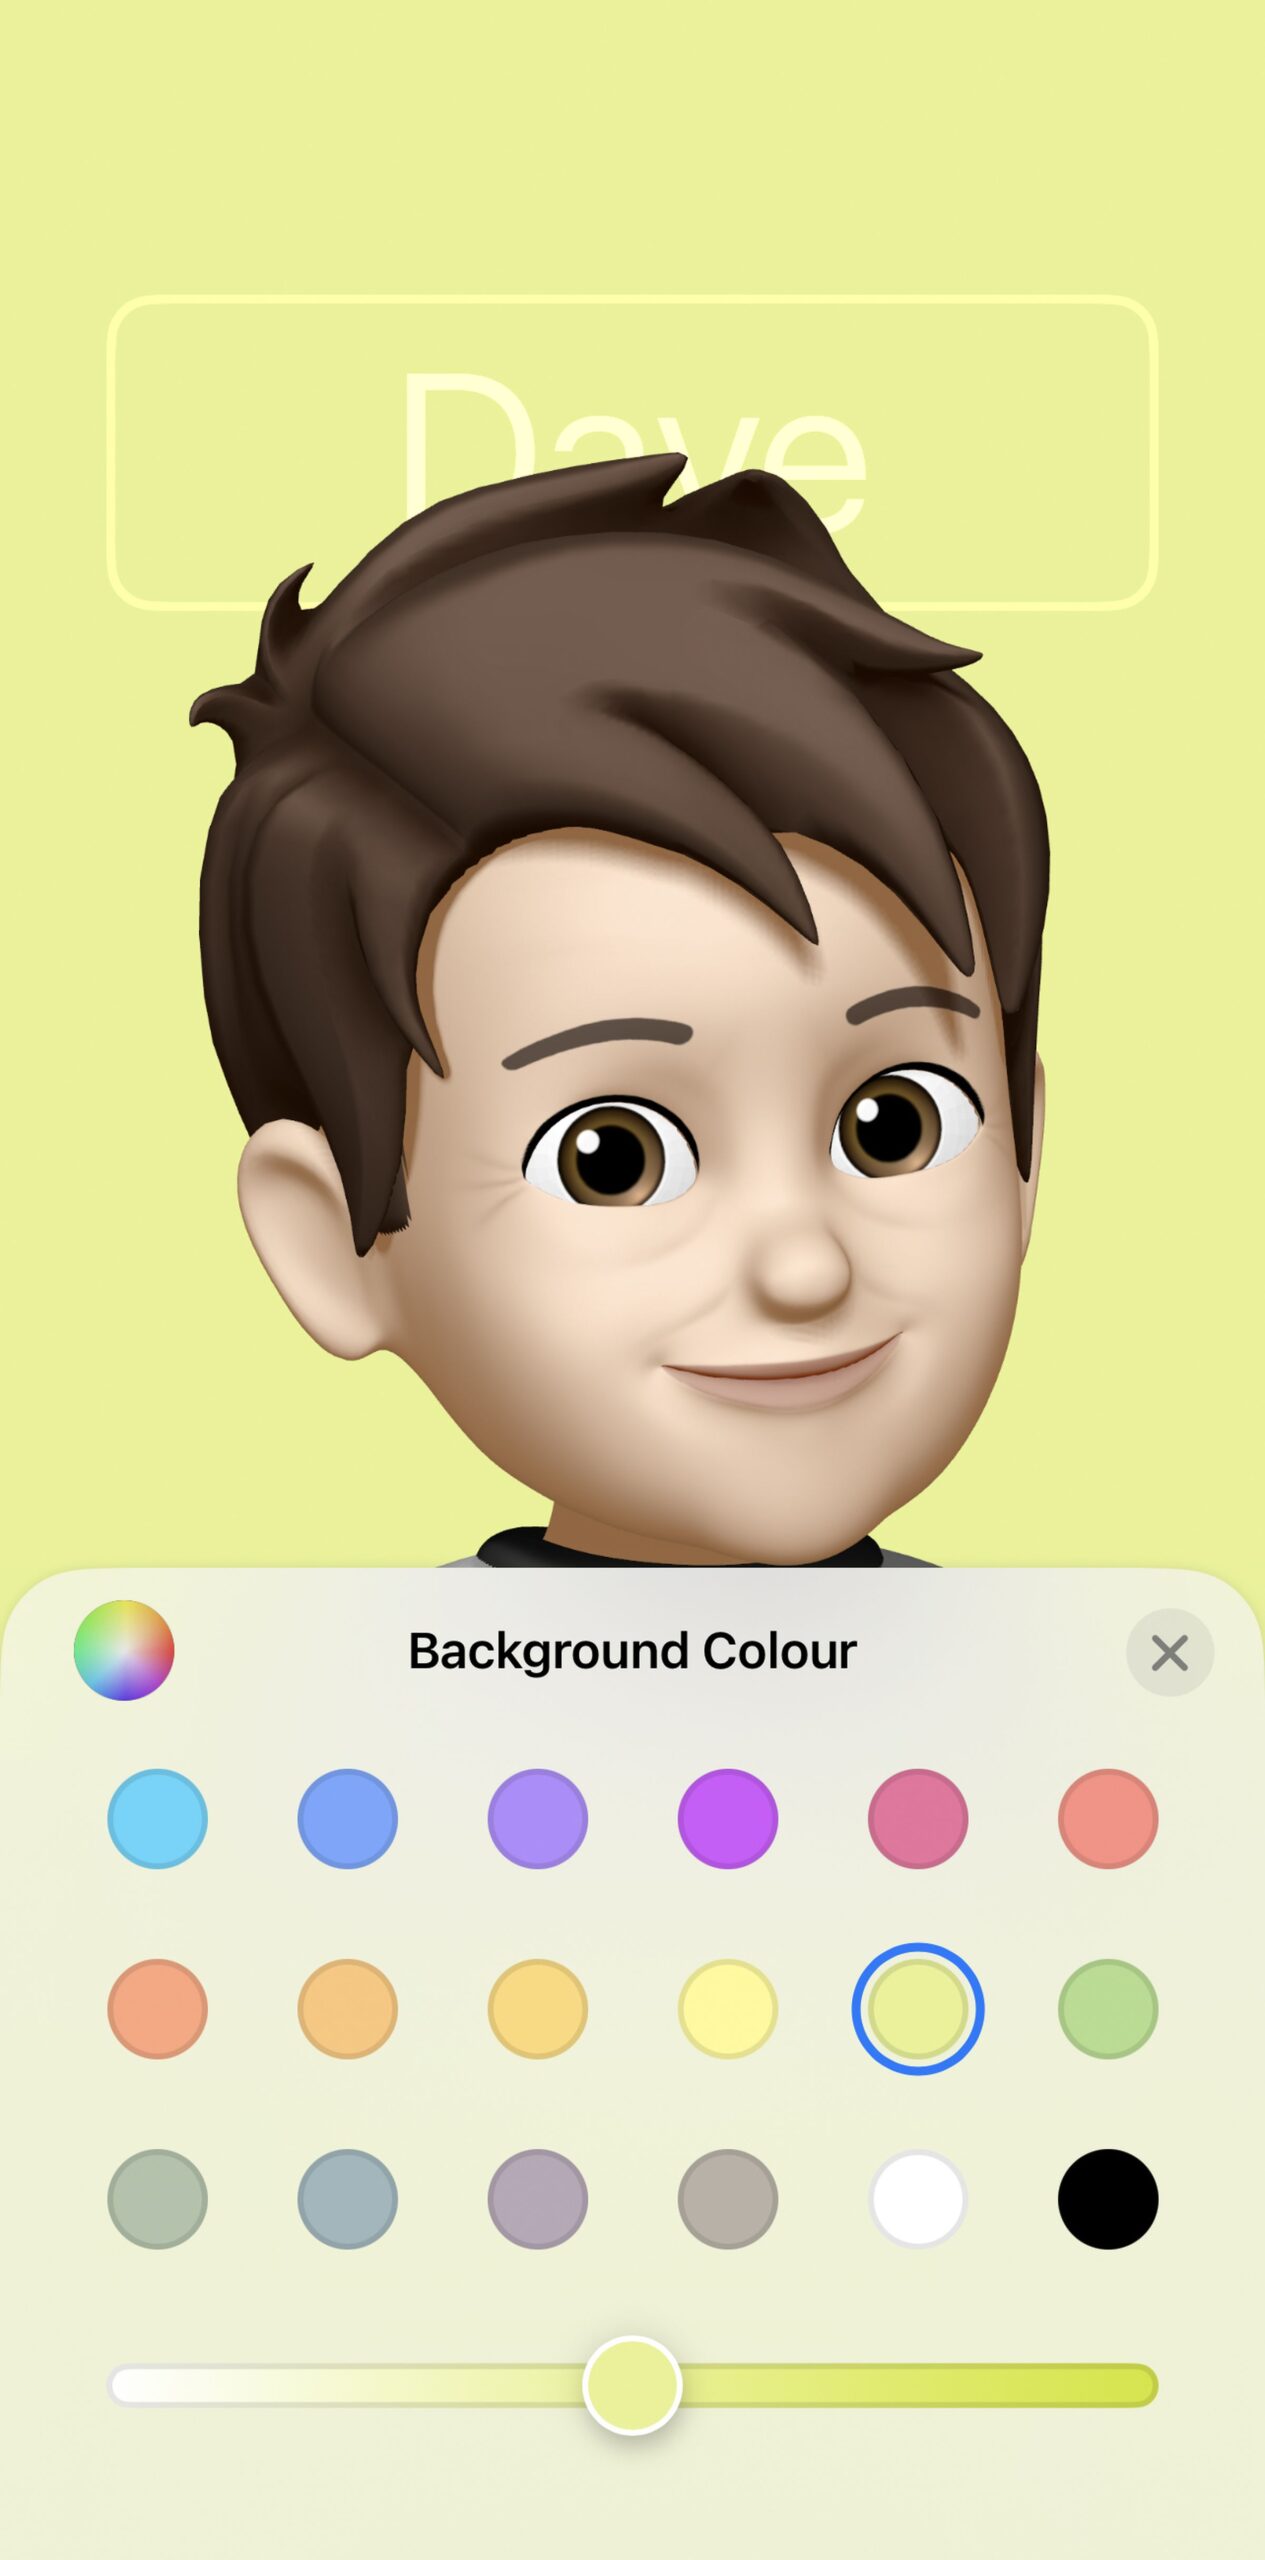 Illustration of head of boy with brown hair over the word Dave, with words Background Colour and circles with different colors on bottom third of screen.